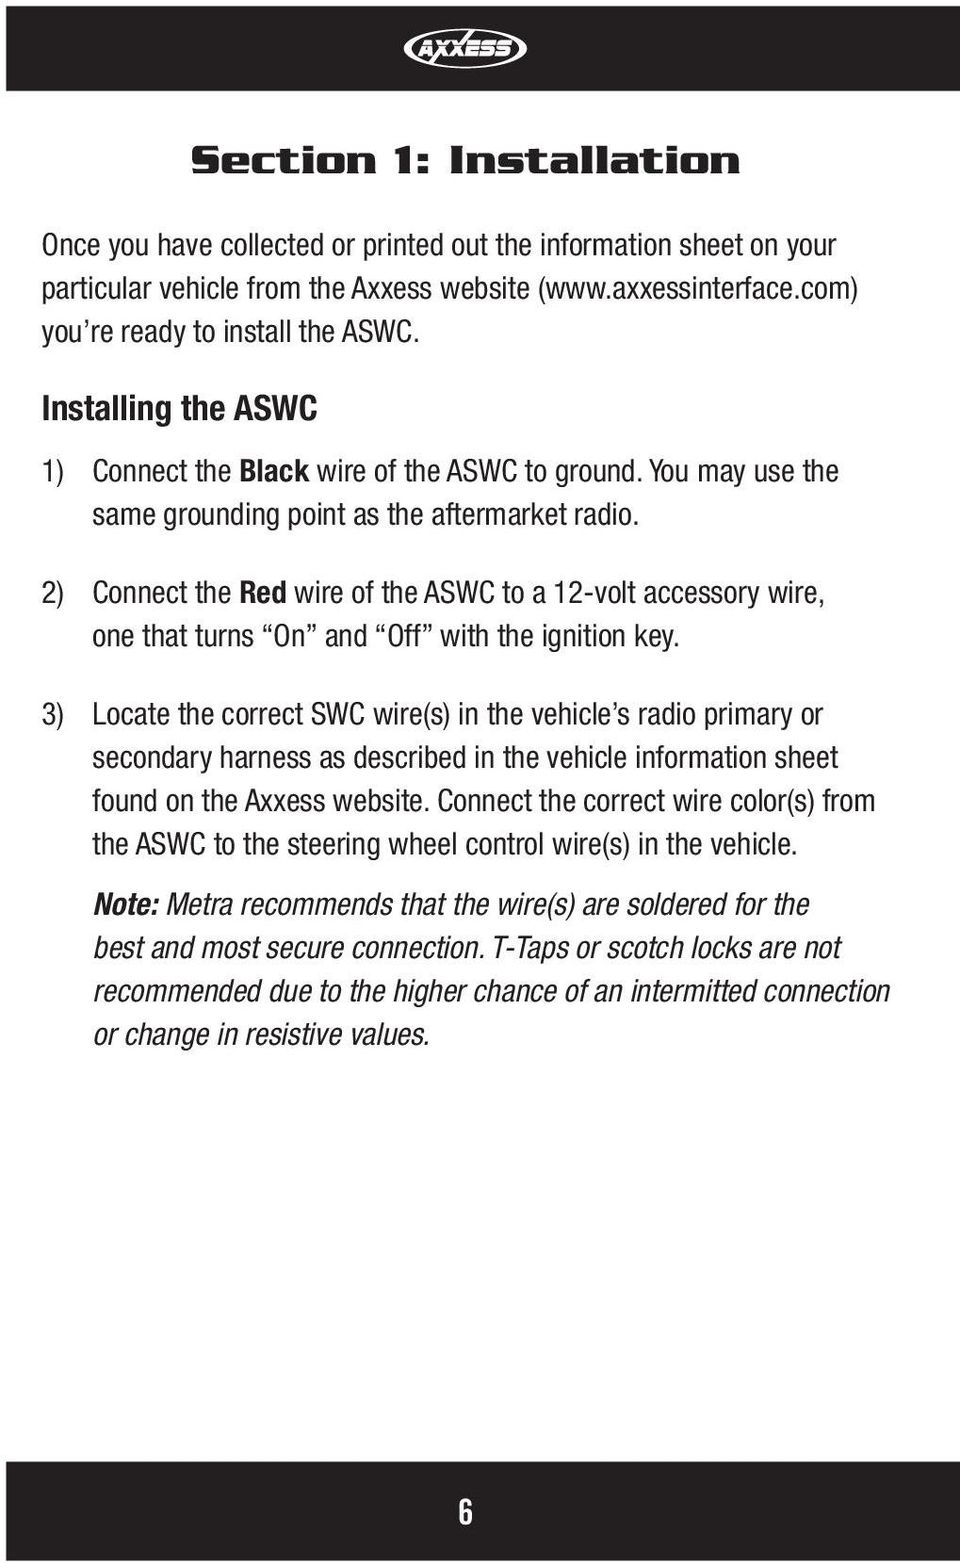 2) Connect the Red wire of the ASWC to a 12-volt accessory wire, one that turns On and Off with the ignition key.